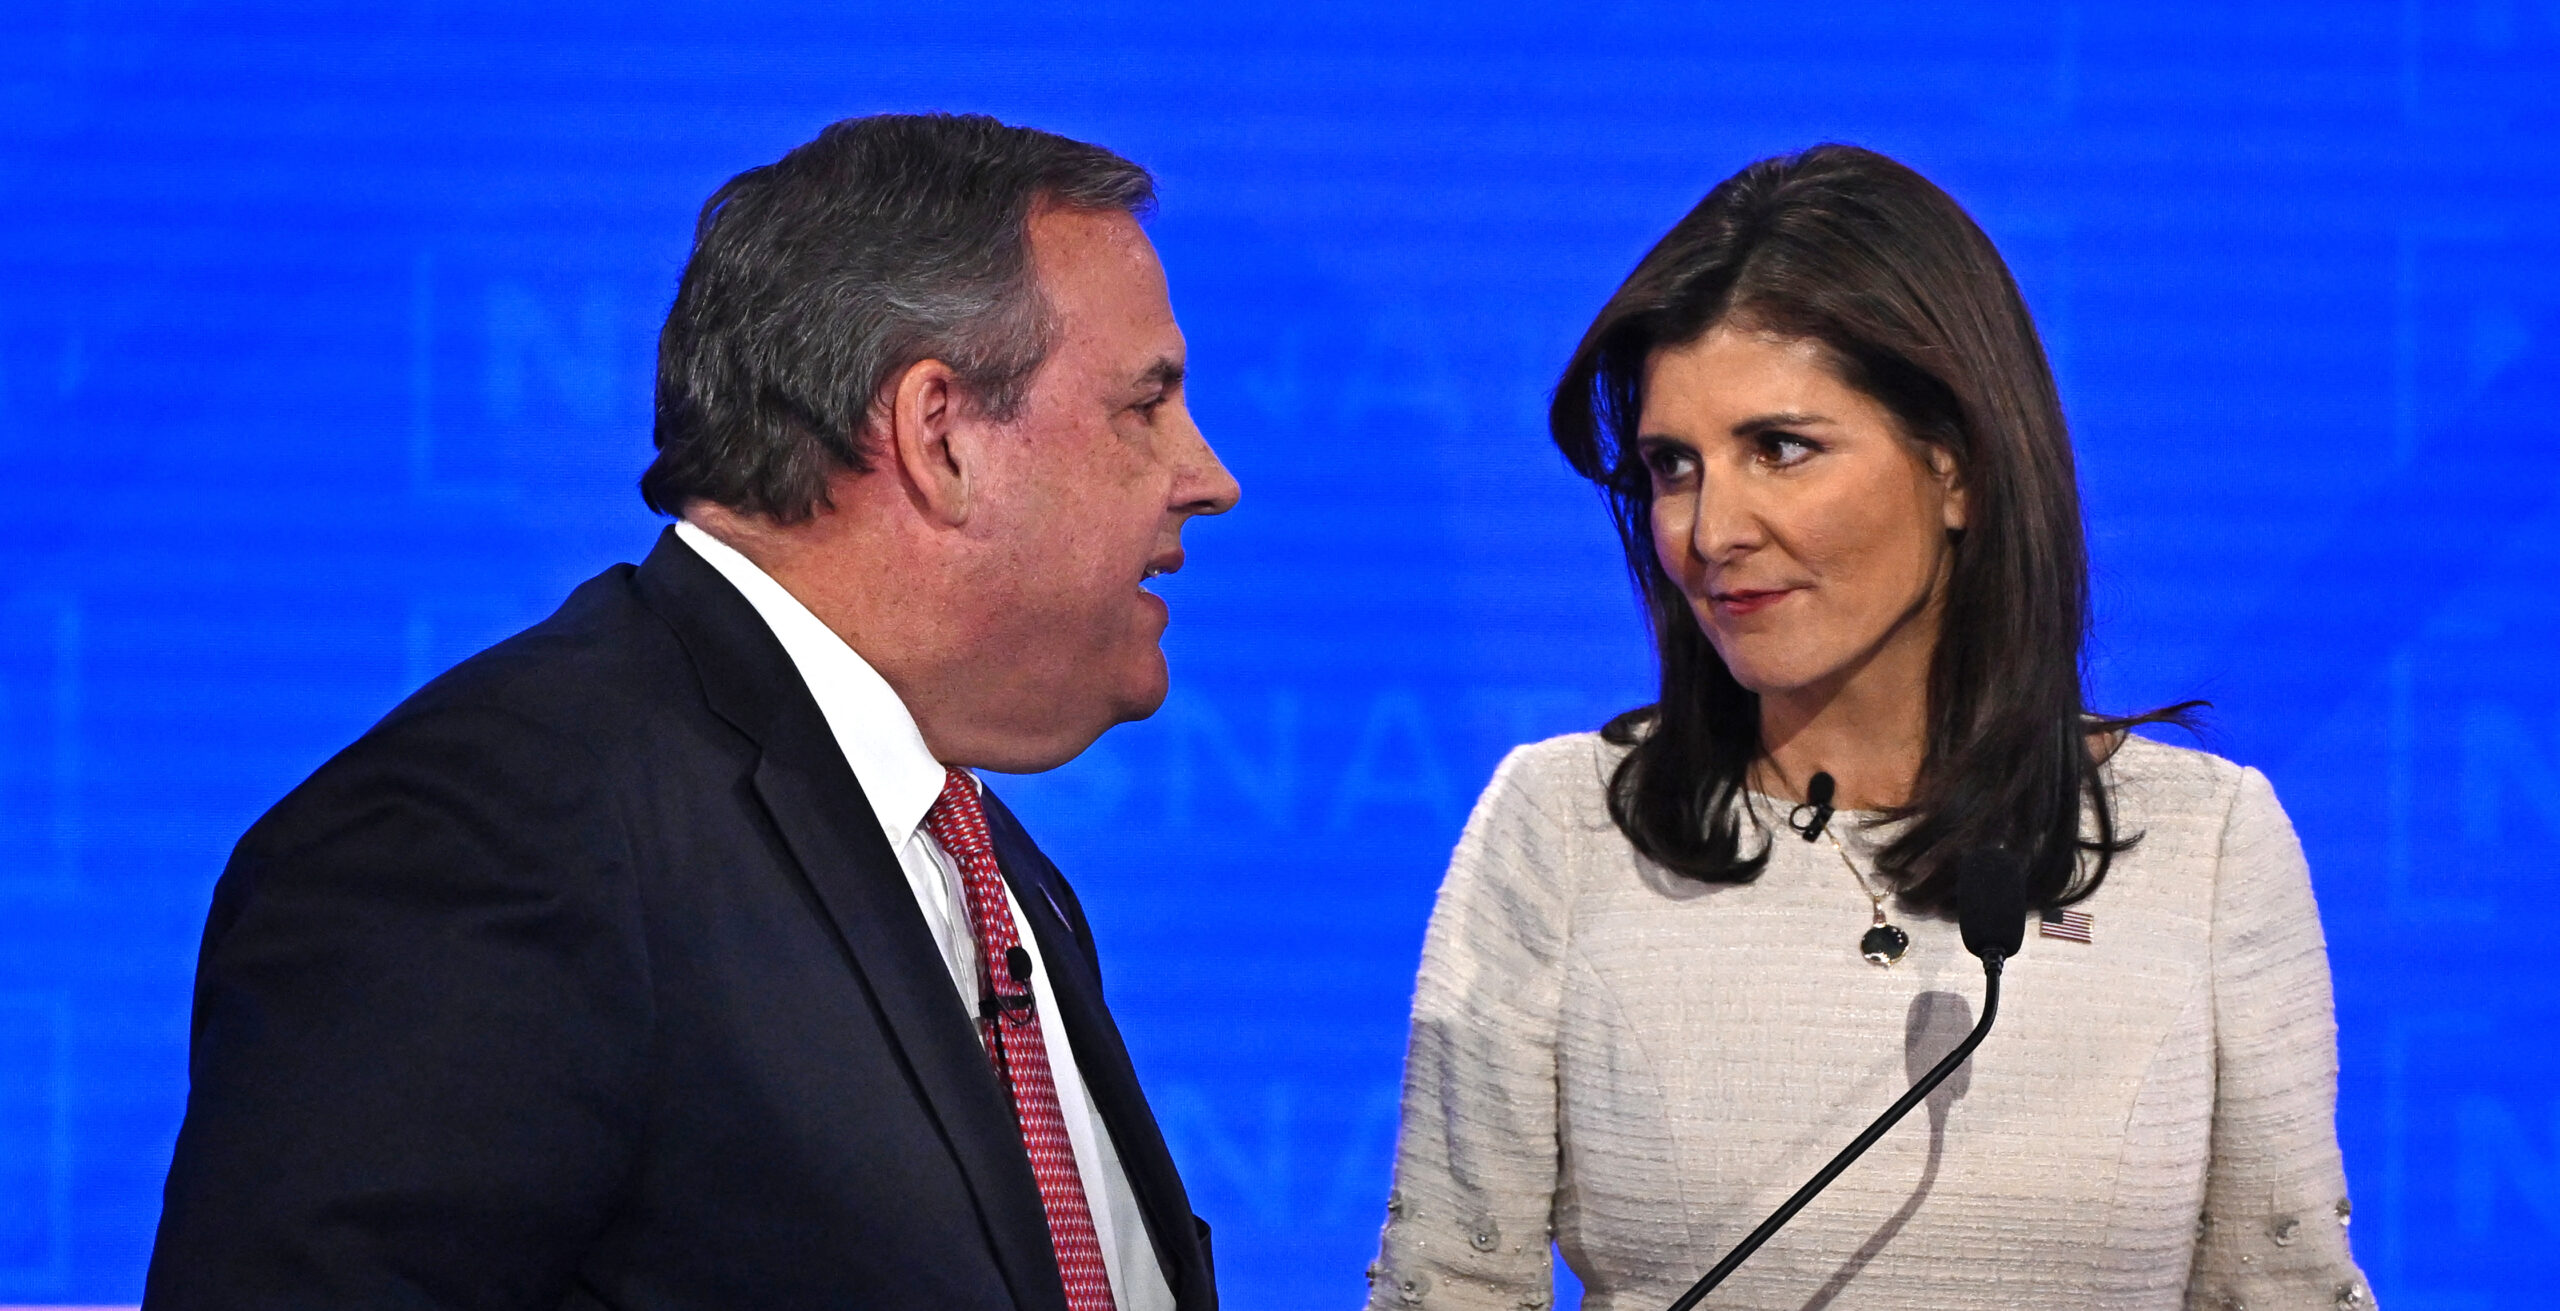 Haley, Christie Silent on Ohio Governor’s Veto of Bill Protecting Children From Gender Ideology